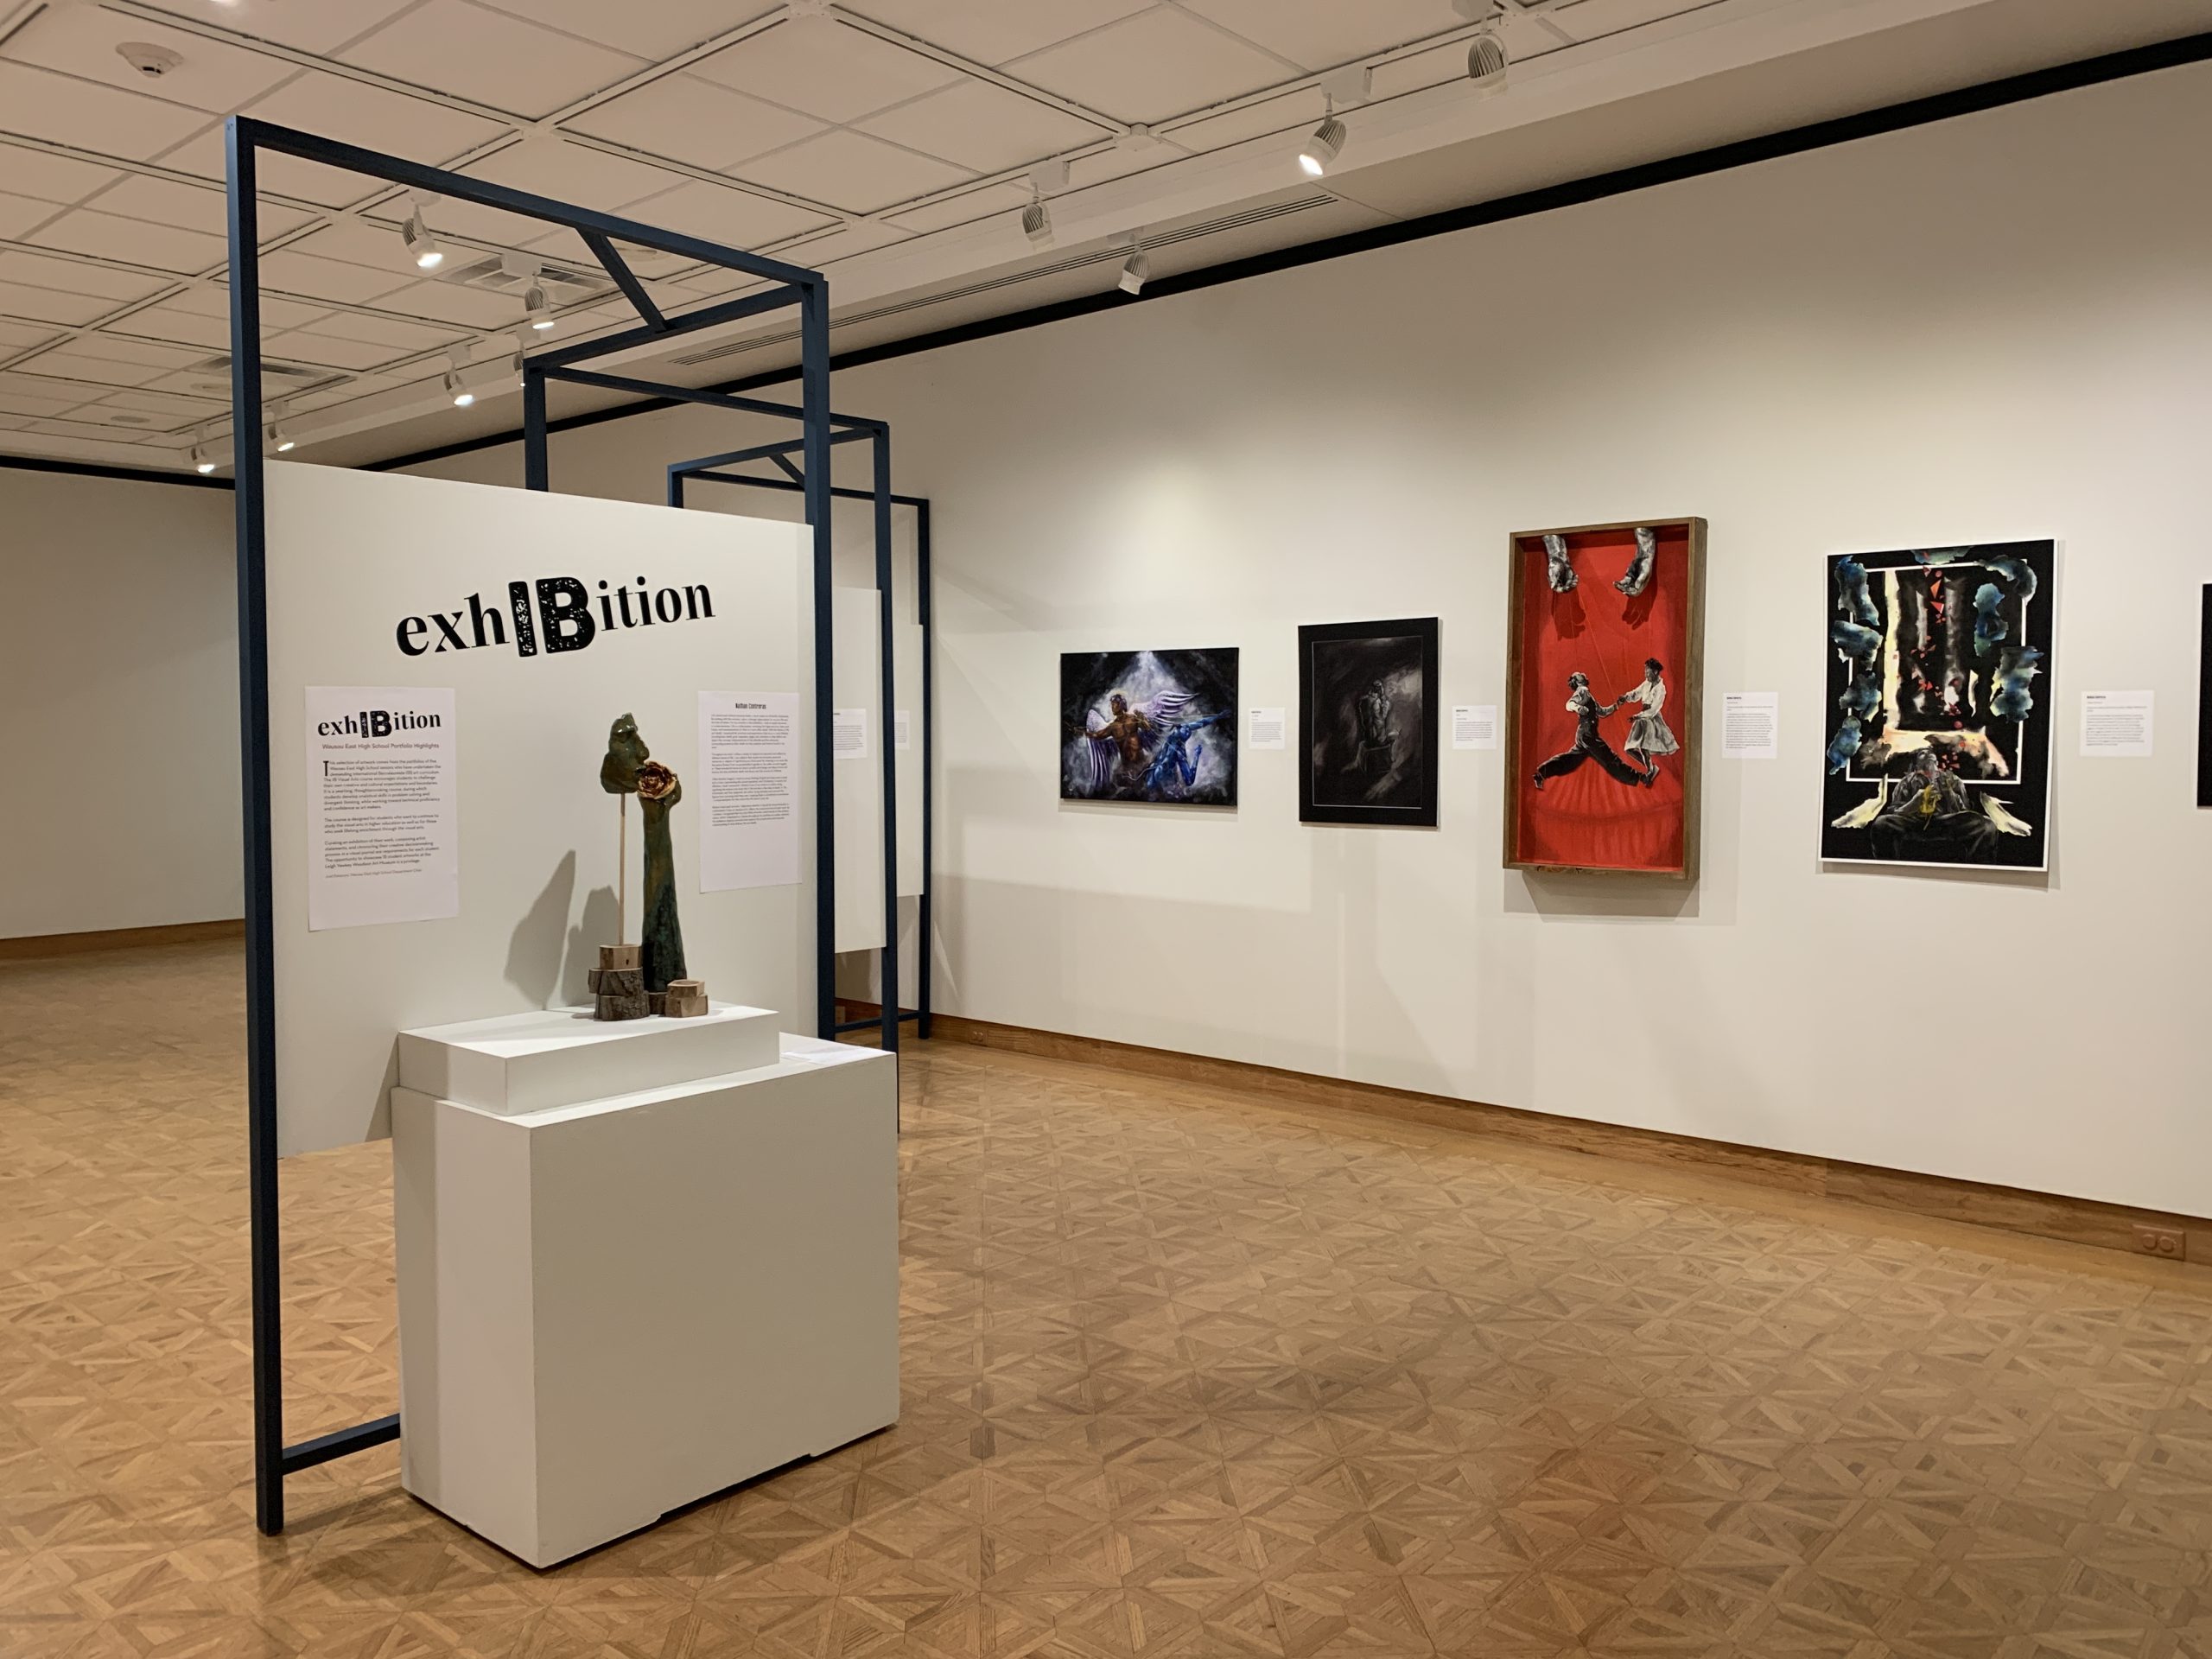 A three dimensional mixed media artwork depicting a face and hand holding a flower sits atop a pedestal in the gallery. Near the sculptural work are four artworks hanging on the wall. One features a dancing couple on red background. Above the couple are two hands holding strings, as if controlling the people dancing like puppets.